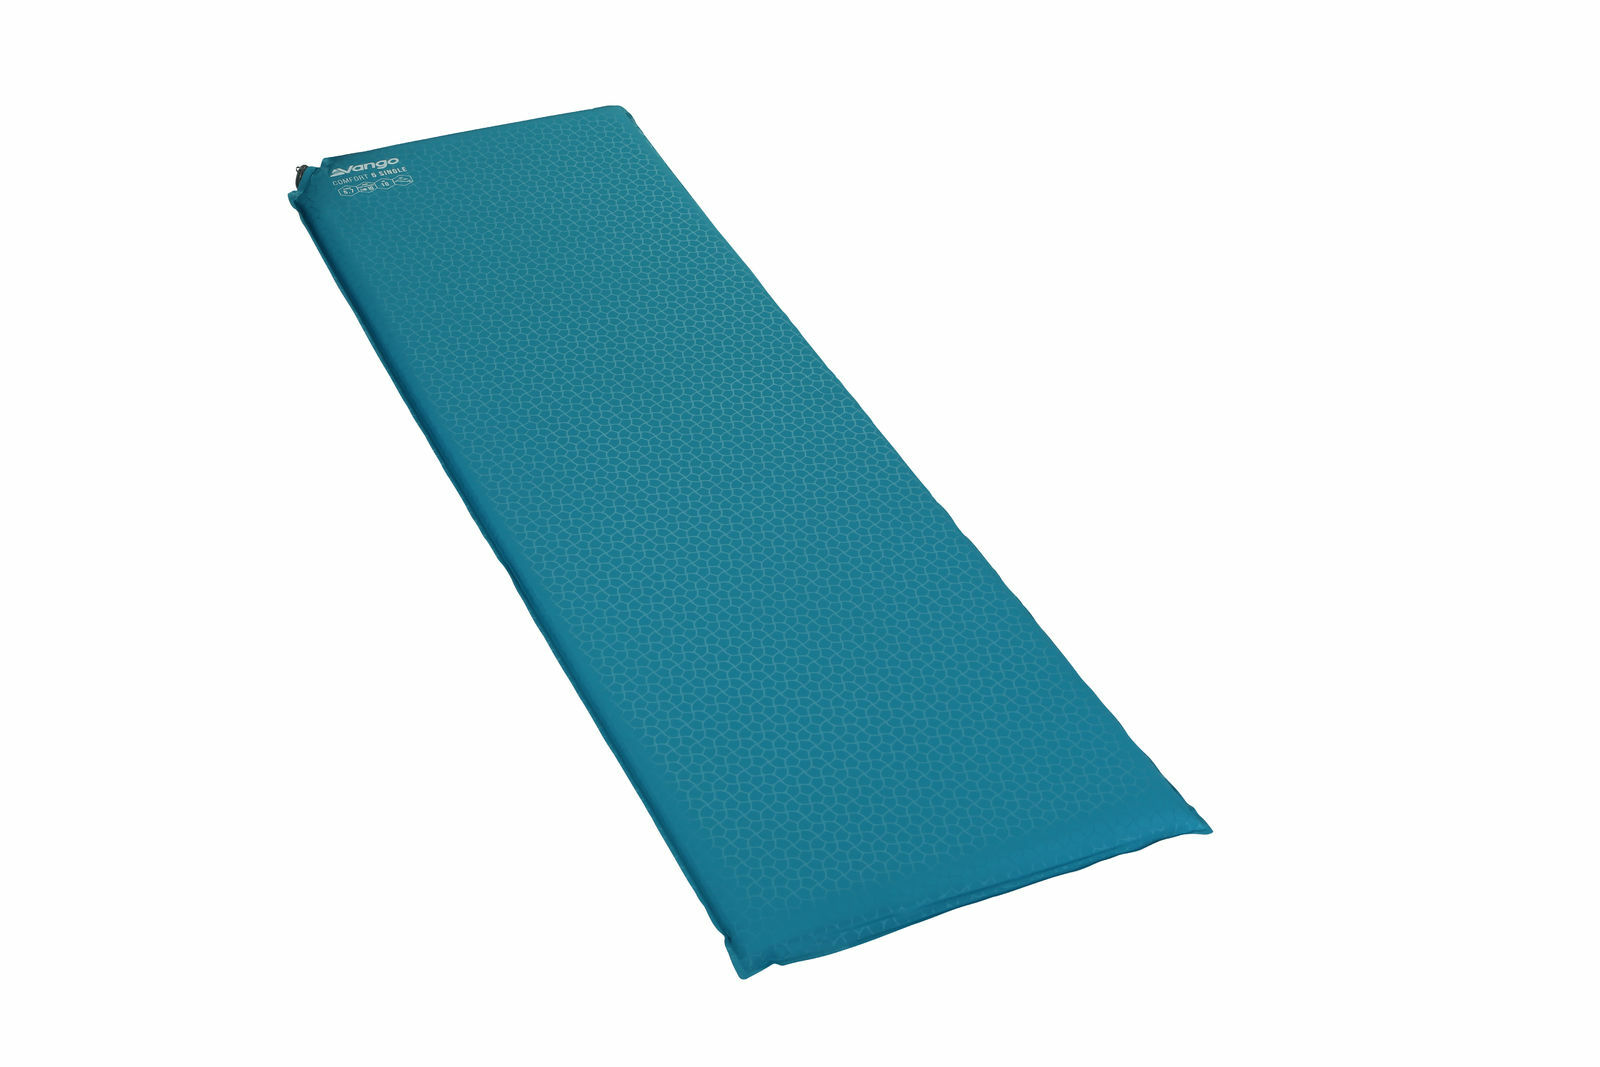 Three-quarter view of the Vango Comfort 5 Single Self-Inflating Mat in turquoise colour.